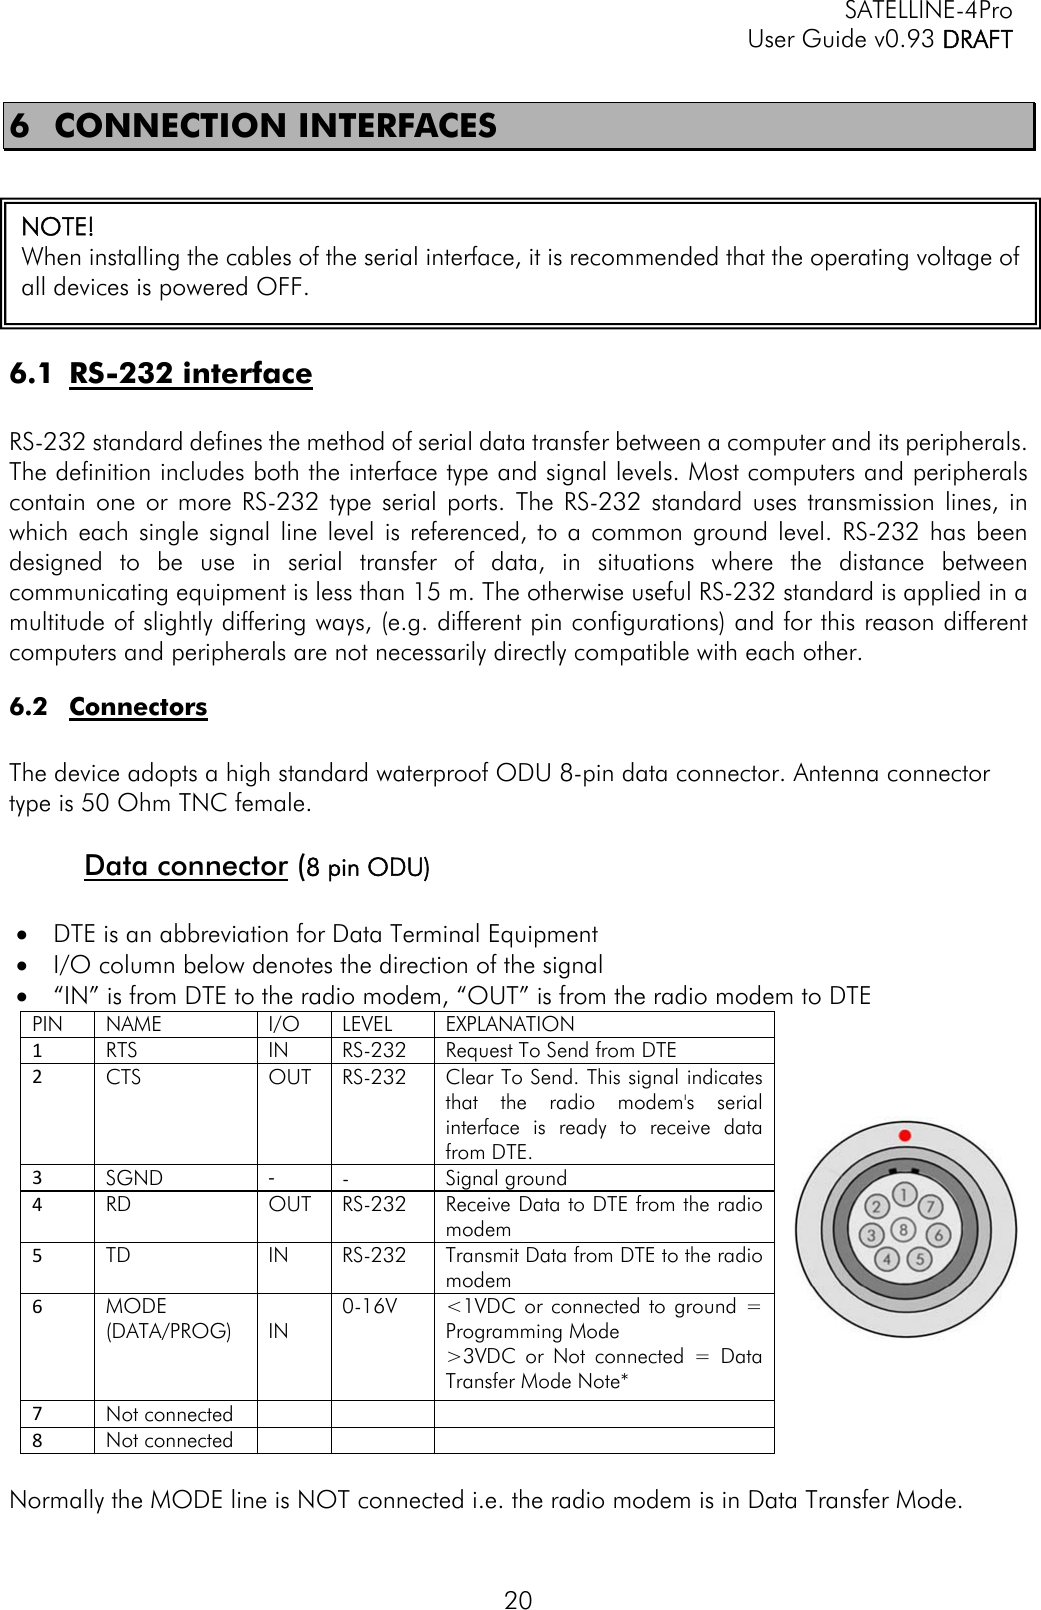   SATELLINE-4Pro   User Guide v0.93 DRAFT 20 6 CONNECTION INTERFACES  6.1 RS-232 interface  RS-232 standard defines the method of serial data transfer between a computer and its peripherals. The definition includes both the interface type and signal levels. Most computers and peripherals contain one or more RS-232 type serial ports. The RS-232 standard uses transmission lines, in which each single signal line level is referenced, to a common ground level. RS-232 has been designed to be use in serial transfer of data, in situations where the distance between communicating equipment is less than 15 m. The otherwise useful RS-232 standard is applied in a multitude of slightly differing ways, (e.g. different pin configurations) and for this reason different computers and peripherals are not necessarily directly compatible with each other. 6.2 Connectors  The device adopts a high standard waterproof ODU 8-pin data connector. Antenna connector type is 50 Ohm TNC female.  Data connector (8 pin ODU)   DTE is an abbreviation for Data Terminal Equipment  I/O column below denotes the direction of the signal  “IN” is from DTE to the radio modem, “OUT” is from the radio modem to DTE PIN  NAME  I/O   LEVEL   EXPLANATION 1RTS IN RS-232   Request To Send from DTE 2CTS OUT RS-232 Clear To Send. This signal indicates that the radio modem&apos;s serial interface is ready to receive data from DTE. 3SGND  ‐-               Signal ground 4RD  OUT  RS-232     Receive Data to DTE from the radio modem 5TD  IN    RS-232     Transmit Data from DTE to the radio modem 6MODE (DATA/PROG)            IN 0-16V       &lt;1VDC or connected to ground = Programming Mode &gt;3VDC or Not connected = Data Transfer Mode Note* 7Not connected    8Not connected     Normally the MODE line is NOT connected i.e. the radio modem is in Data Transfer Mode. NOTE!  When installing the cables of the serial interface, it is recommended that the operating voltage of all devices is powered OFF.   